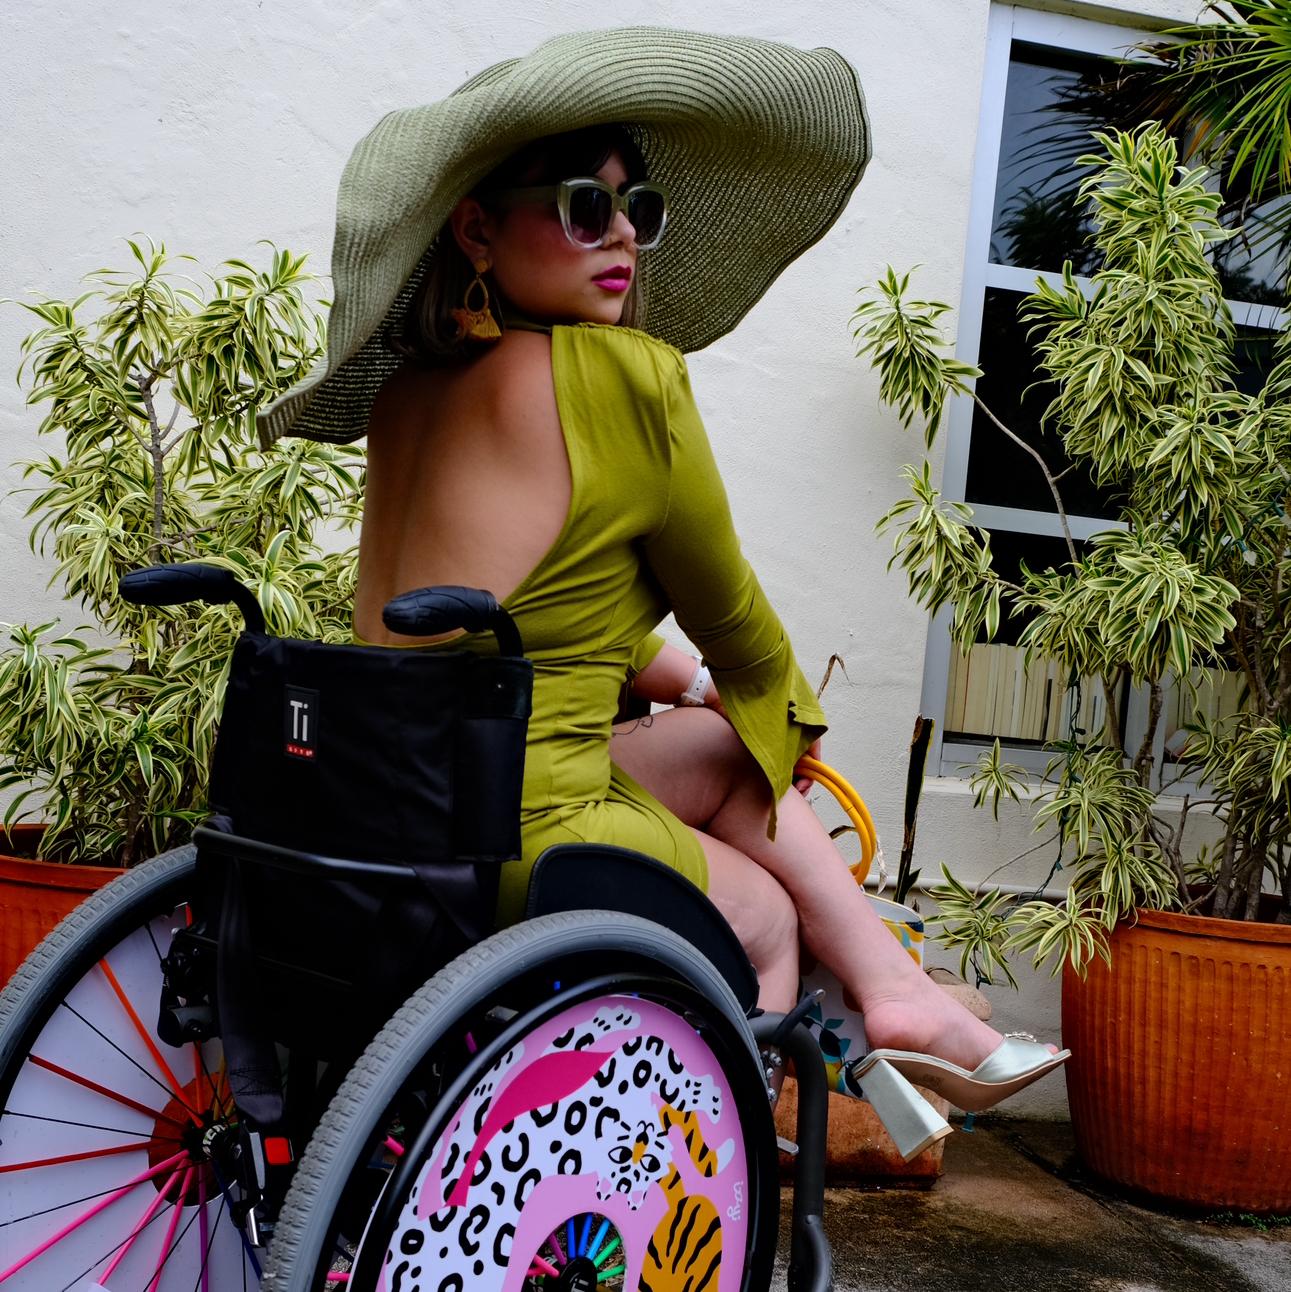 A Disabled Icon's images